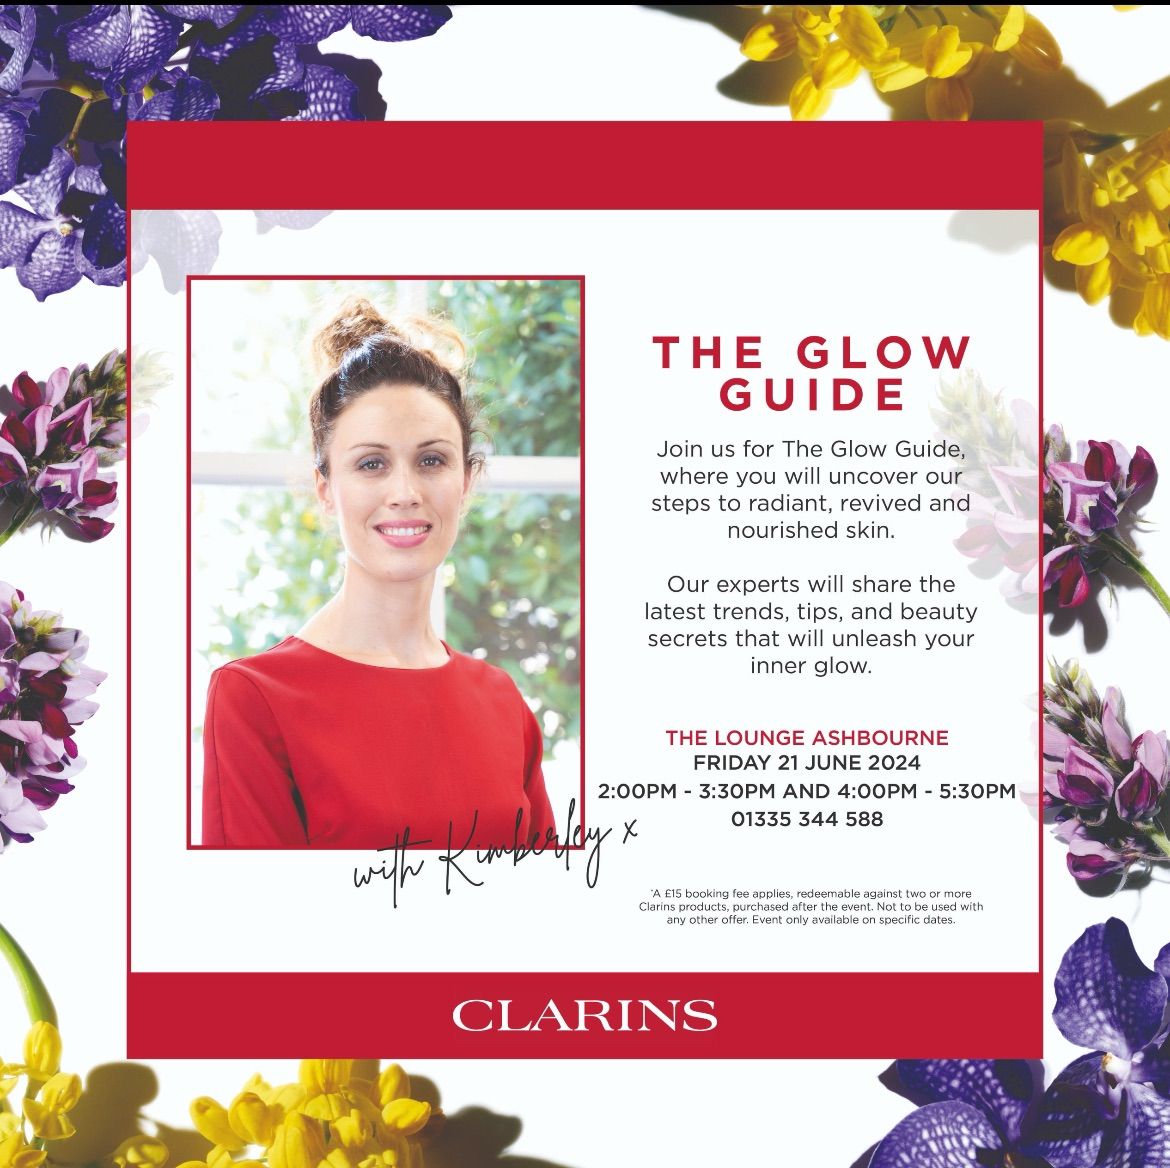 VIP CLARINS EVENT : THE GLOW GUIDE